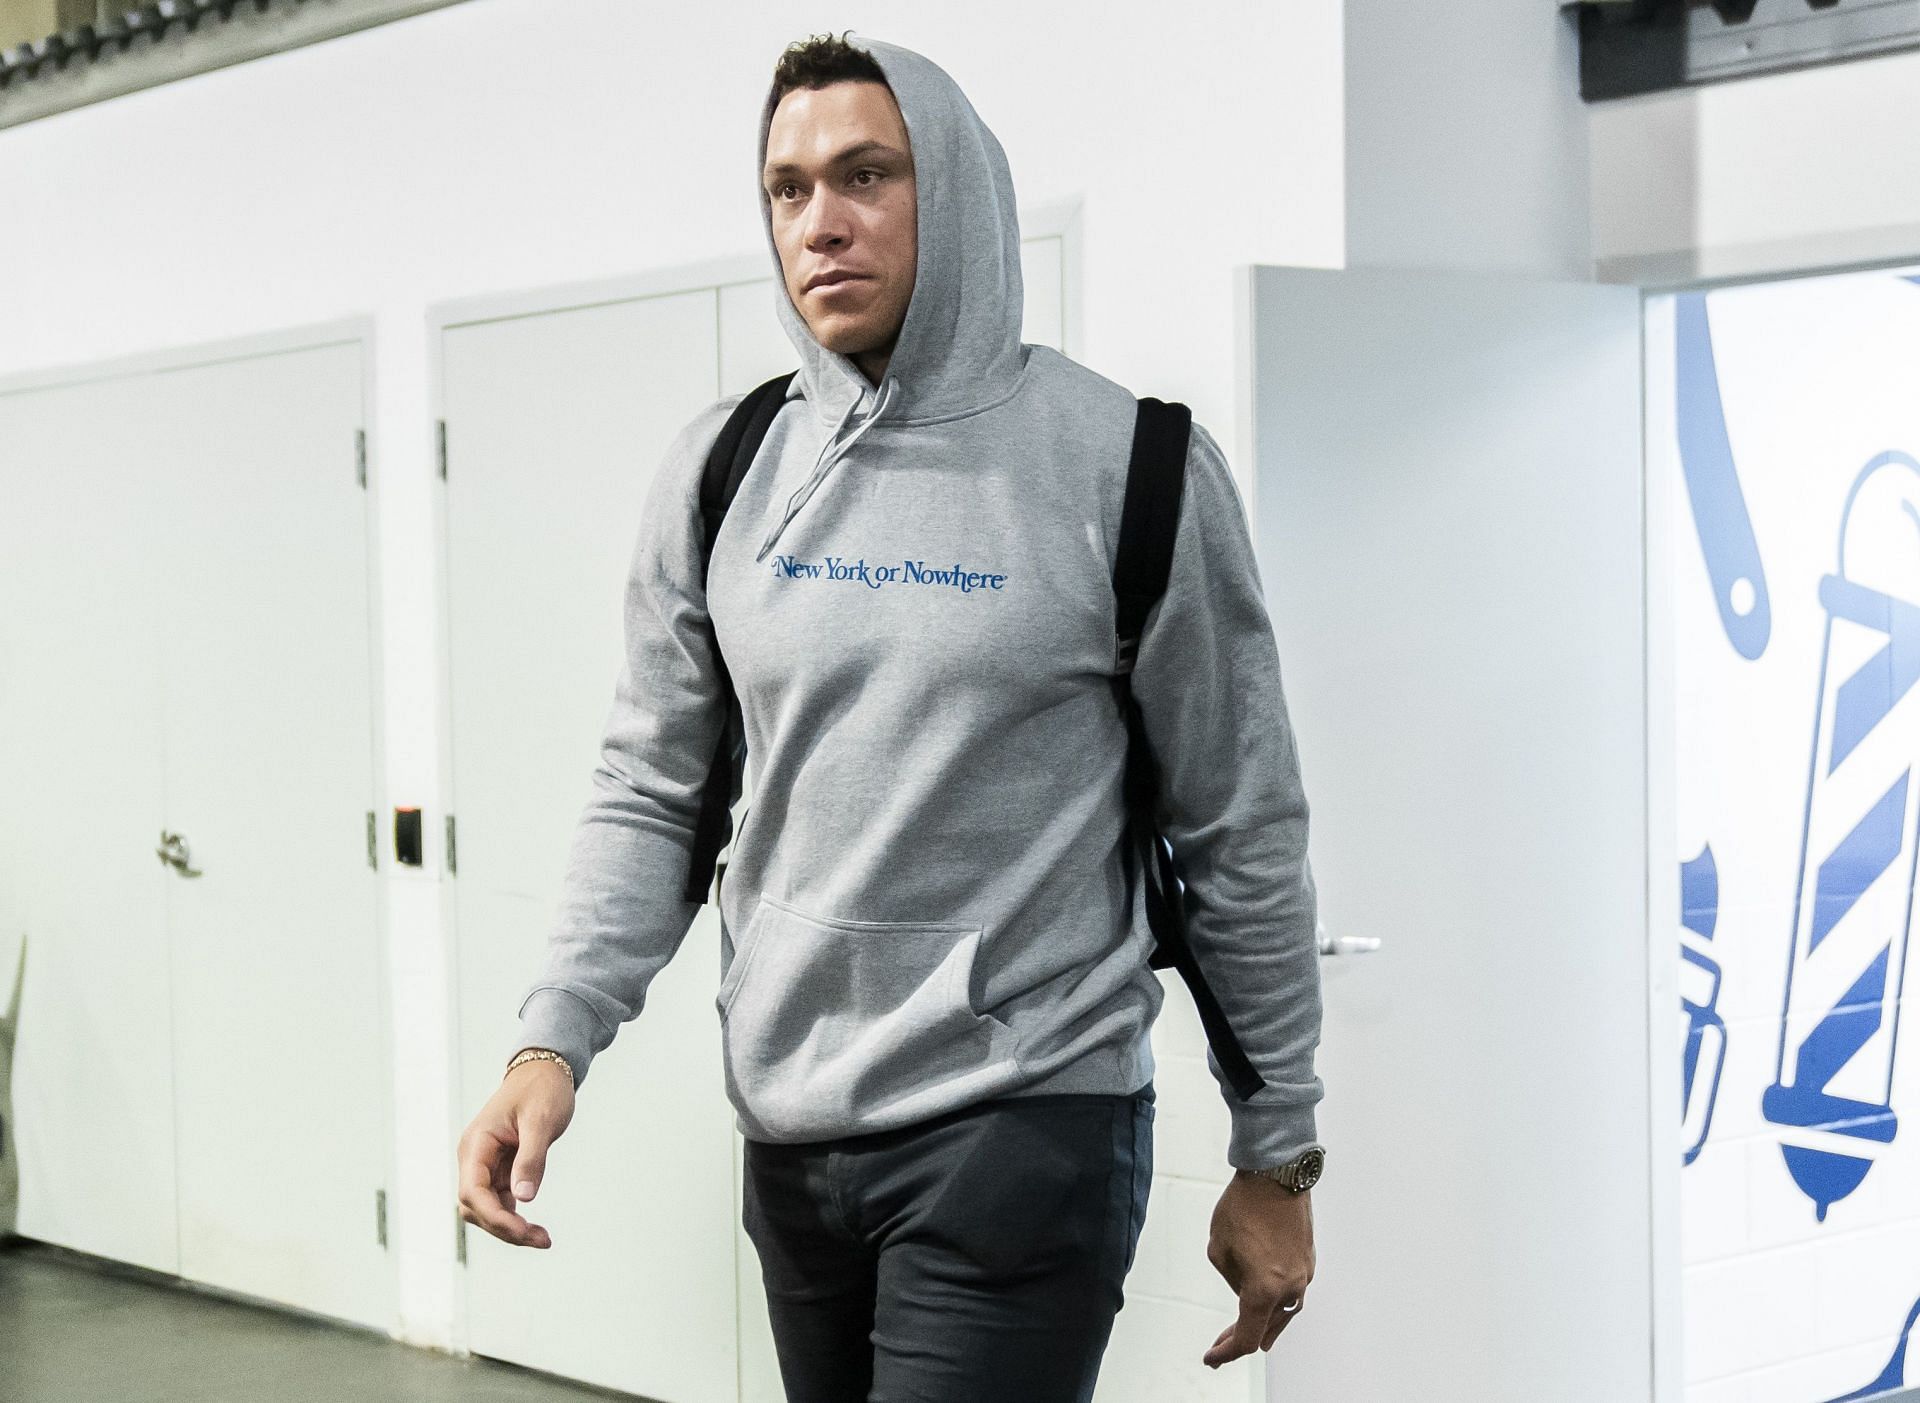 Aaron Judge's Simple Fashion Choice Once Steered an Ambitious